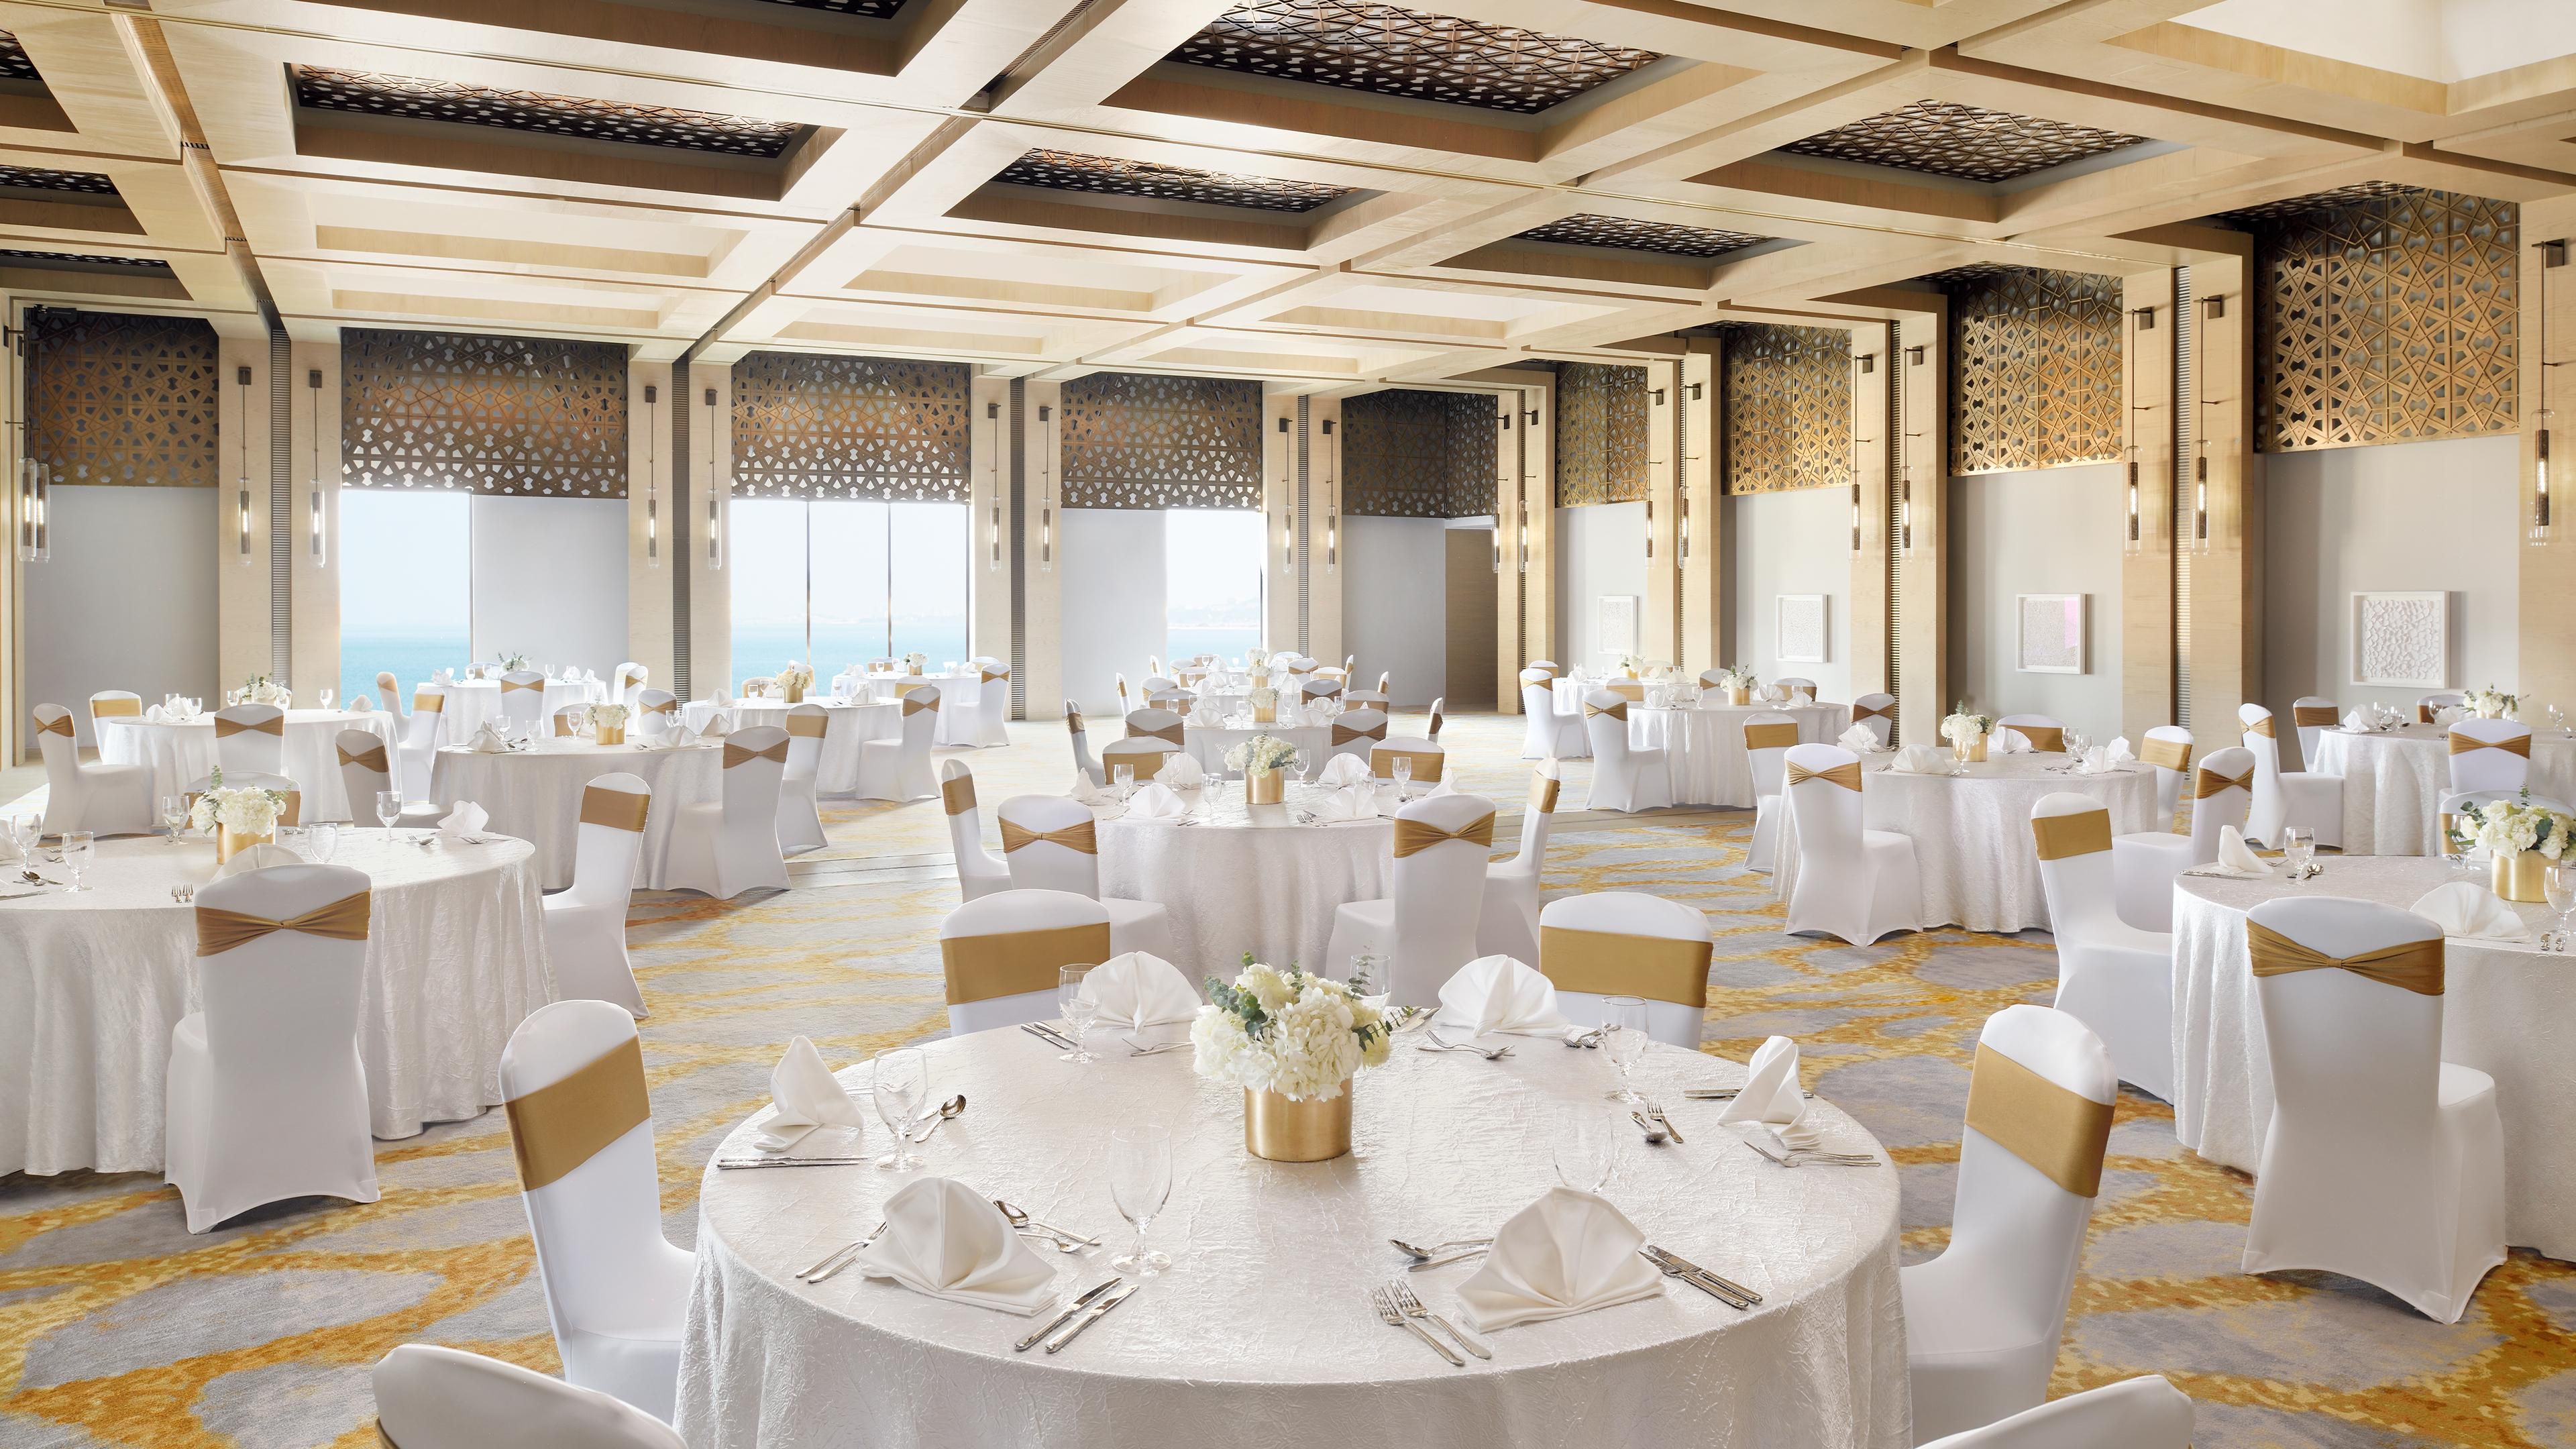 Juman Ballroom is perfect for large-scale events up to 375 guests